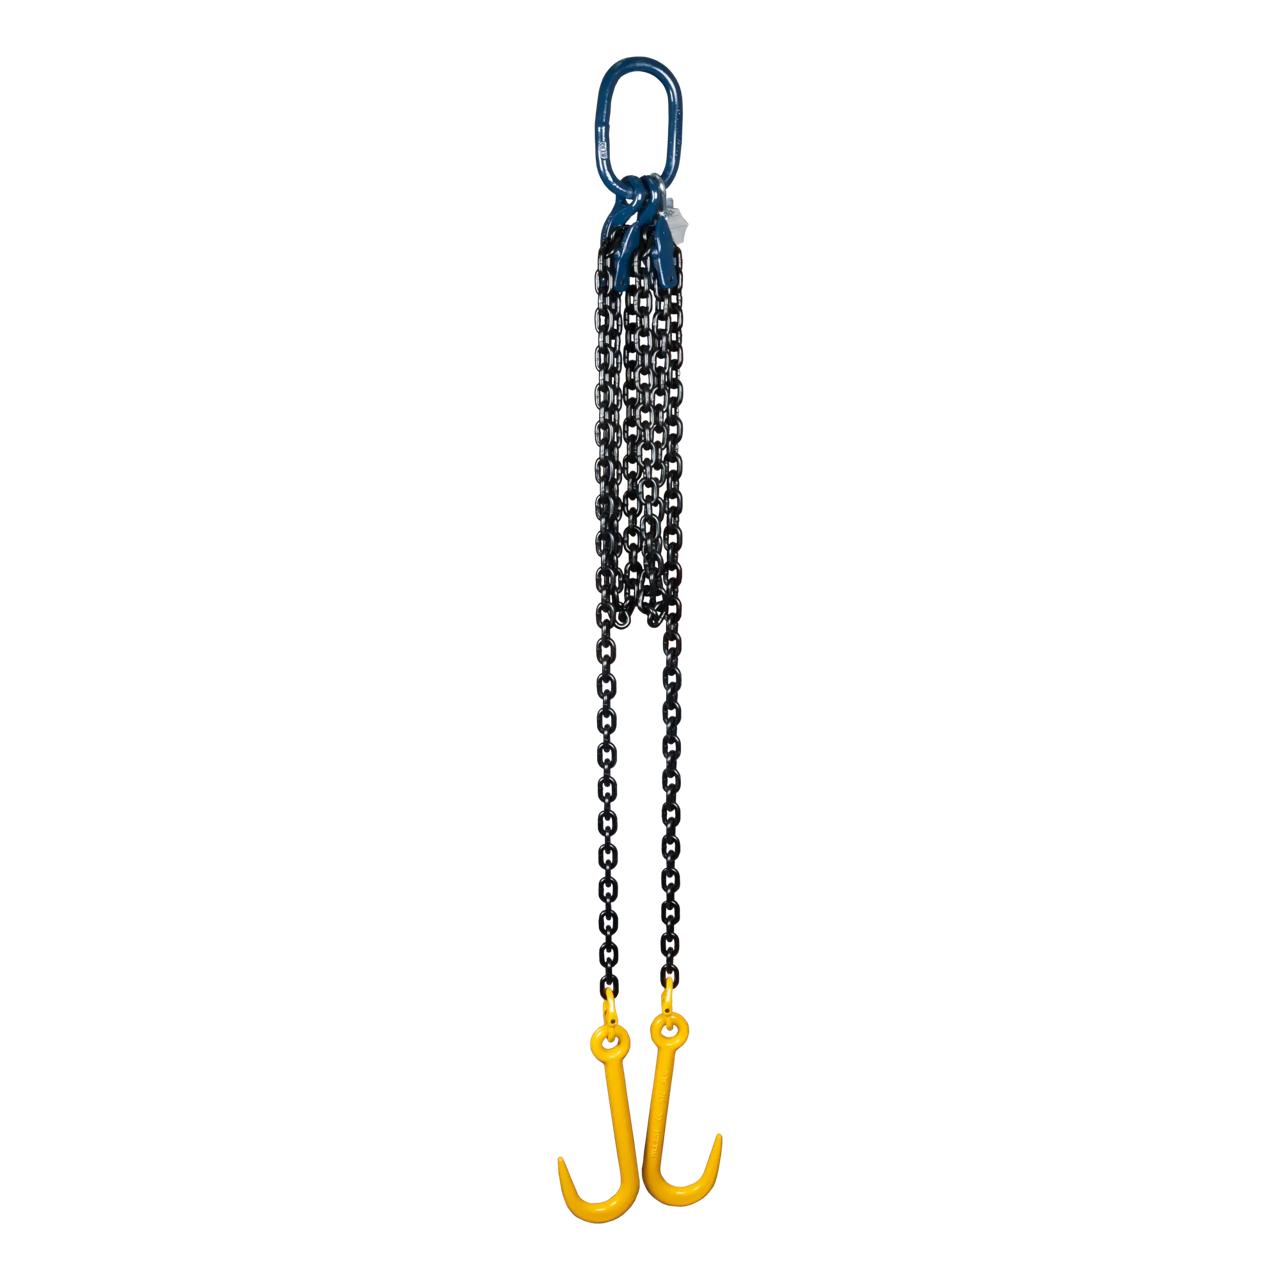 Towing Chain 2-parted, Shark hook